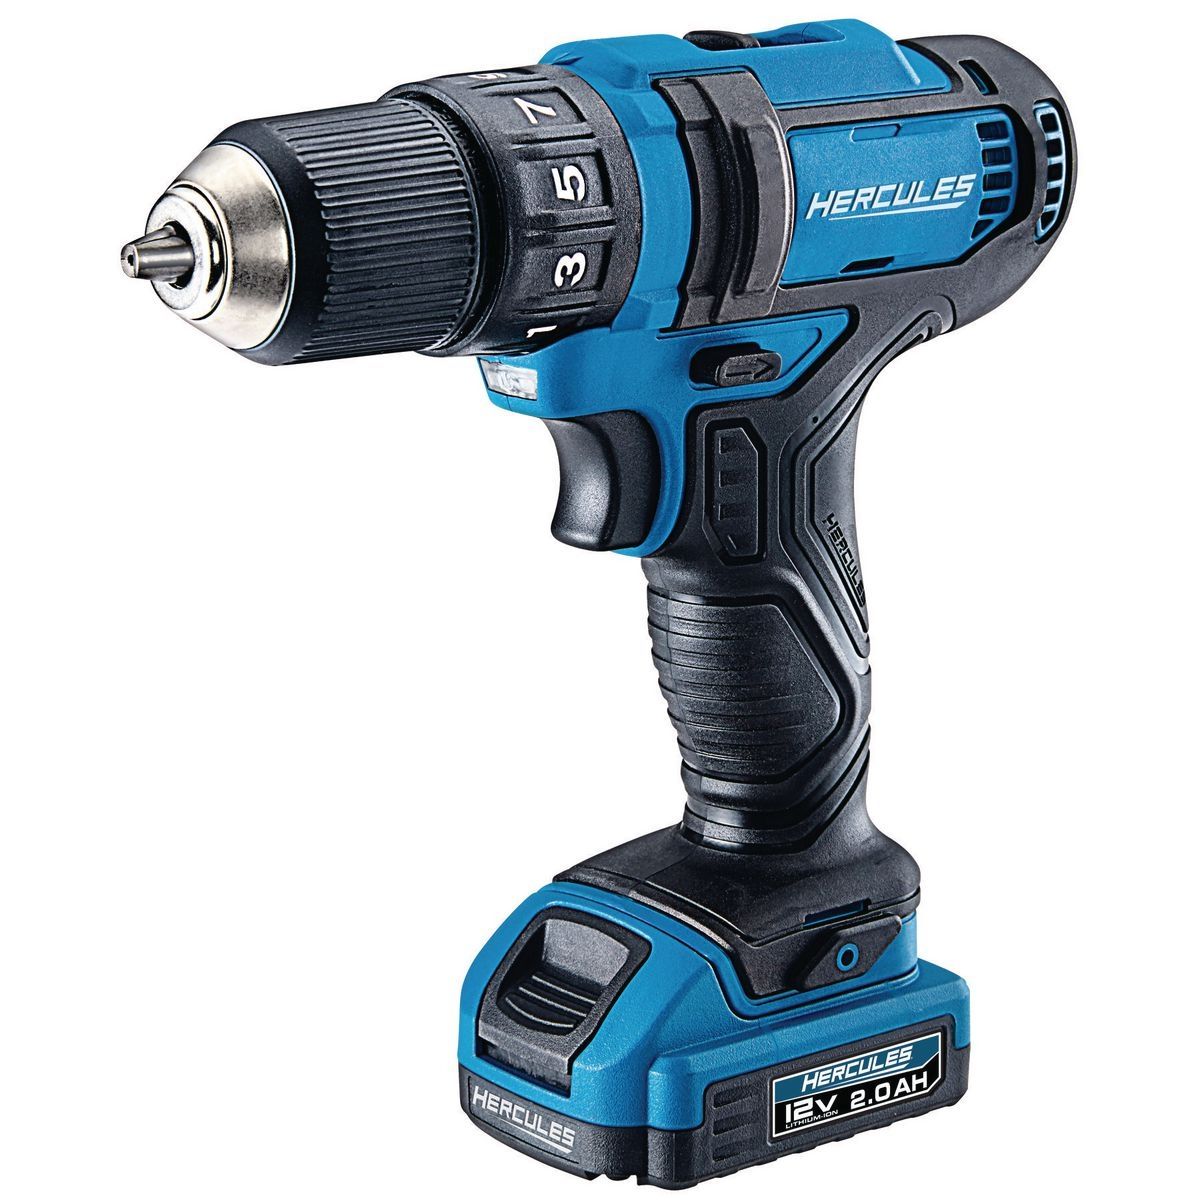 HERCULES 12V Cordless 3/8 in. Compact Drill/Driver - Tool Only